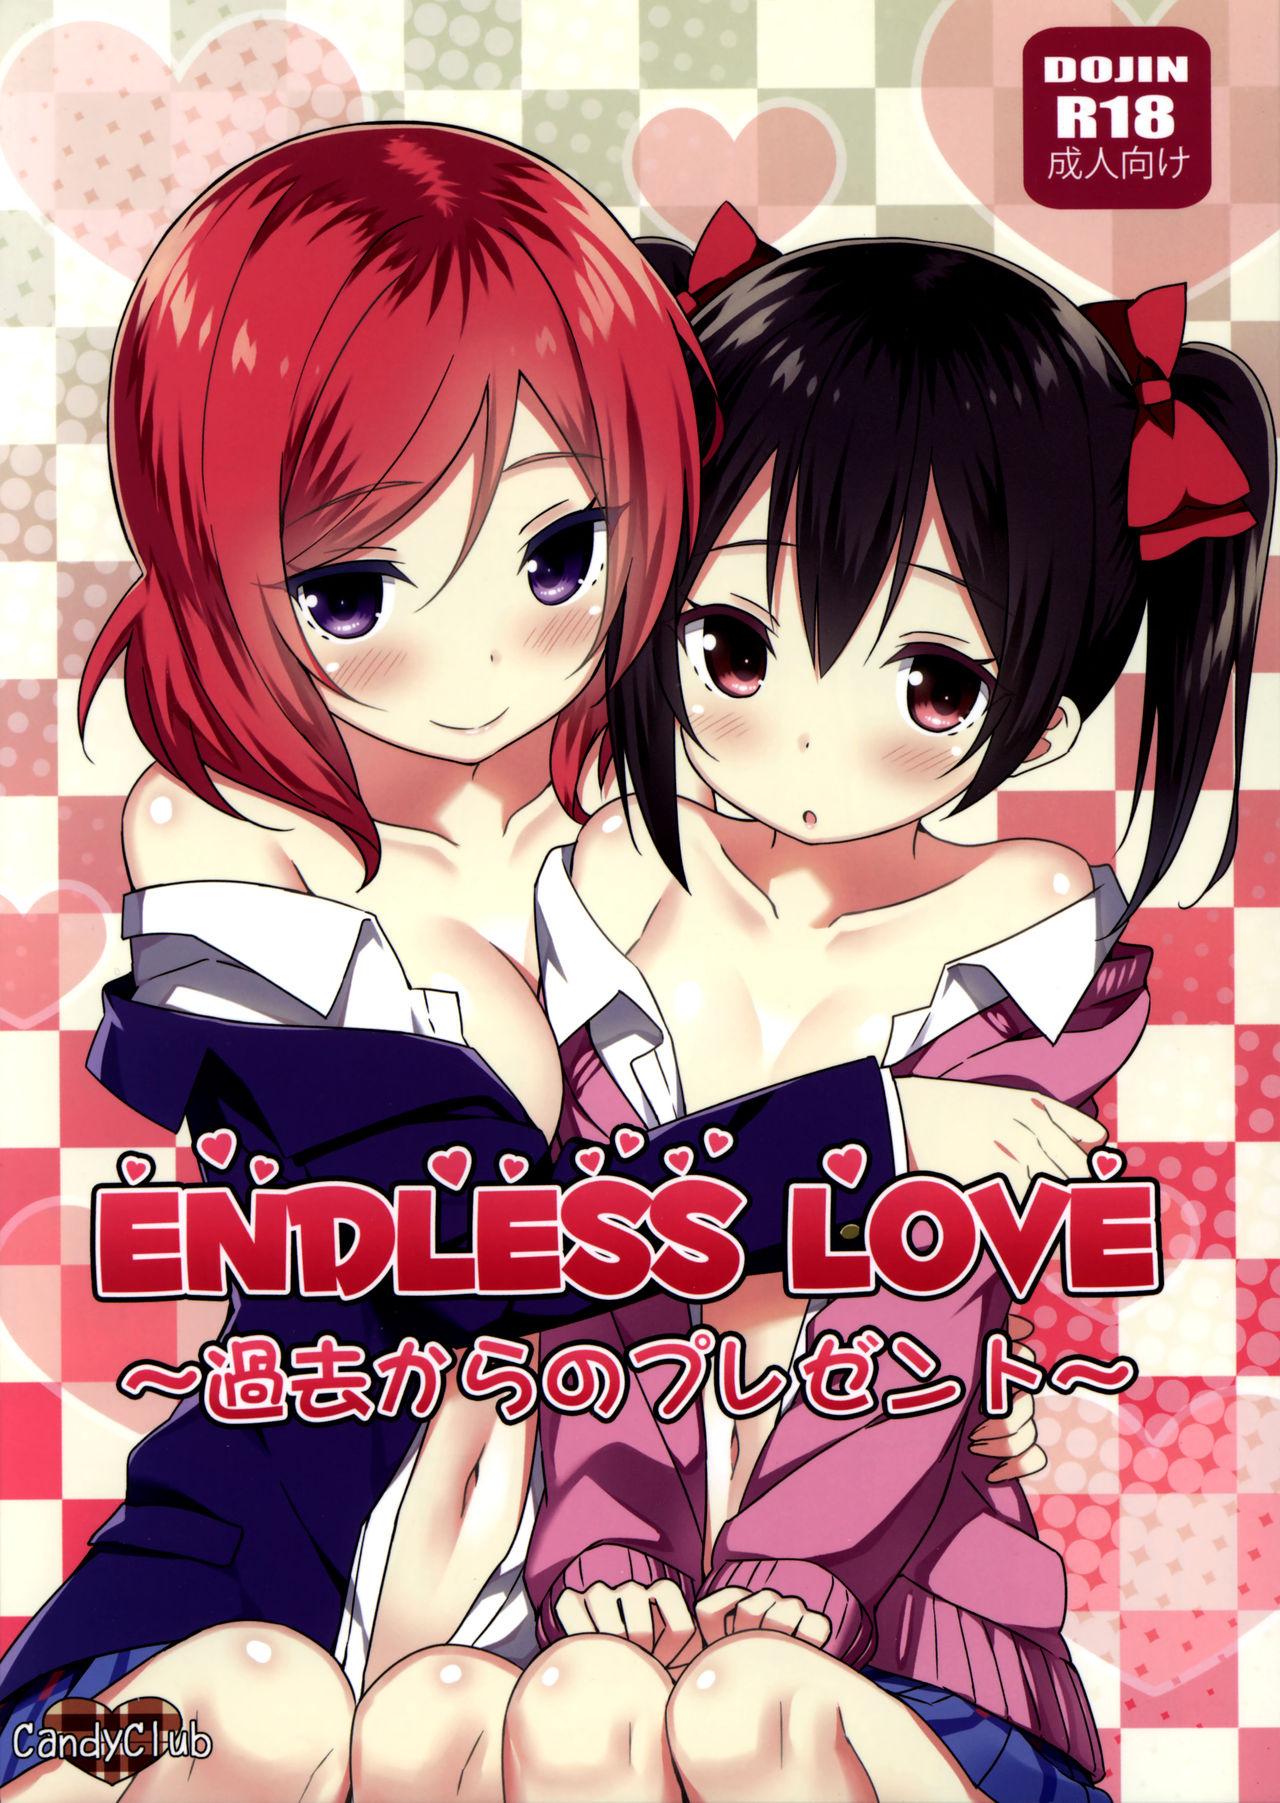 Rope Endless Love - Love live Amiga - Picture 1